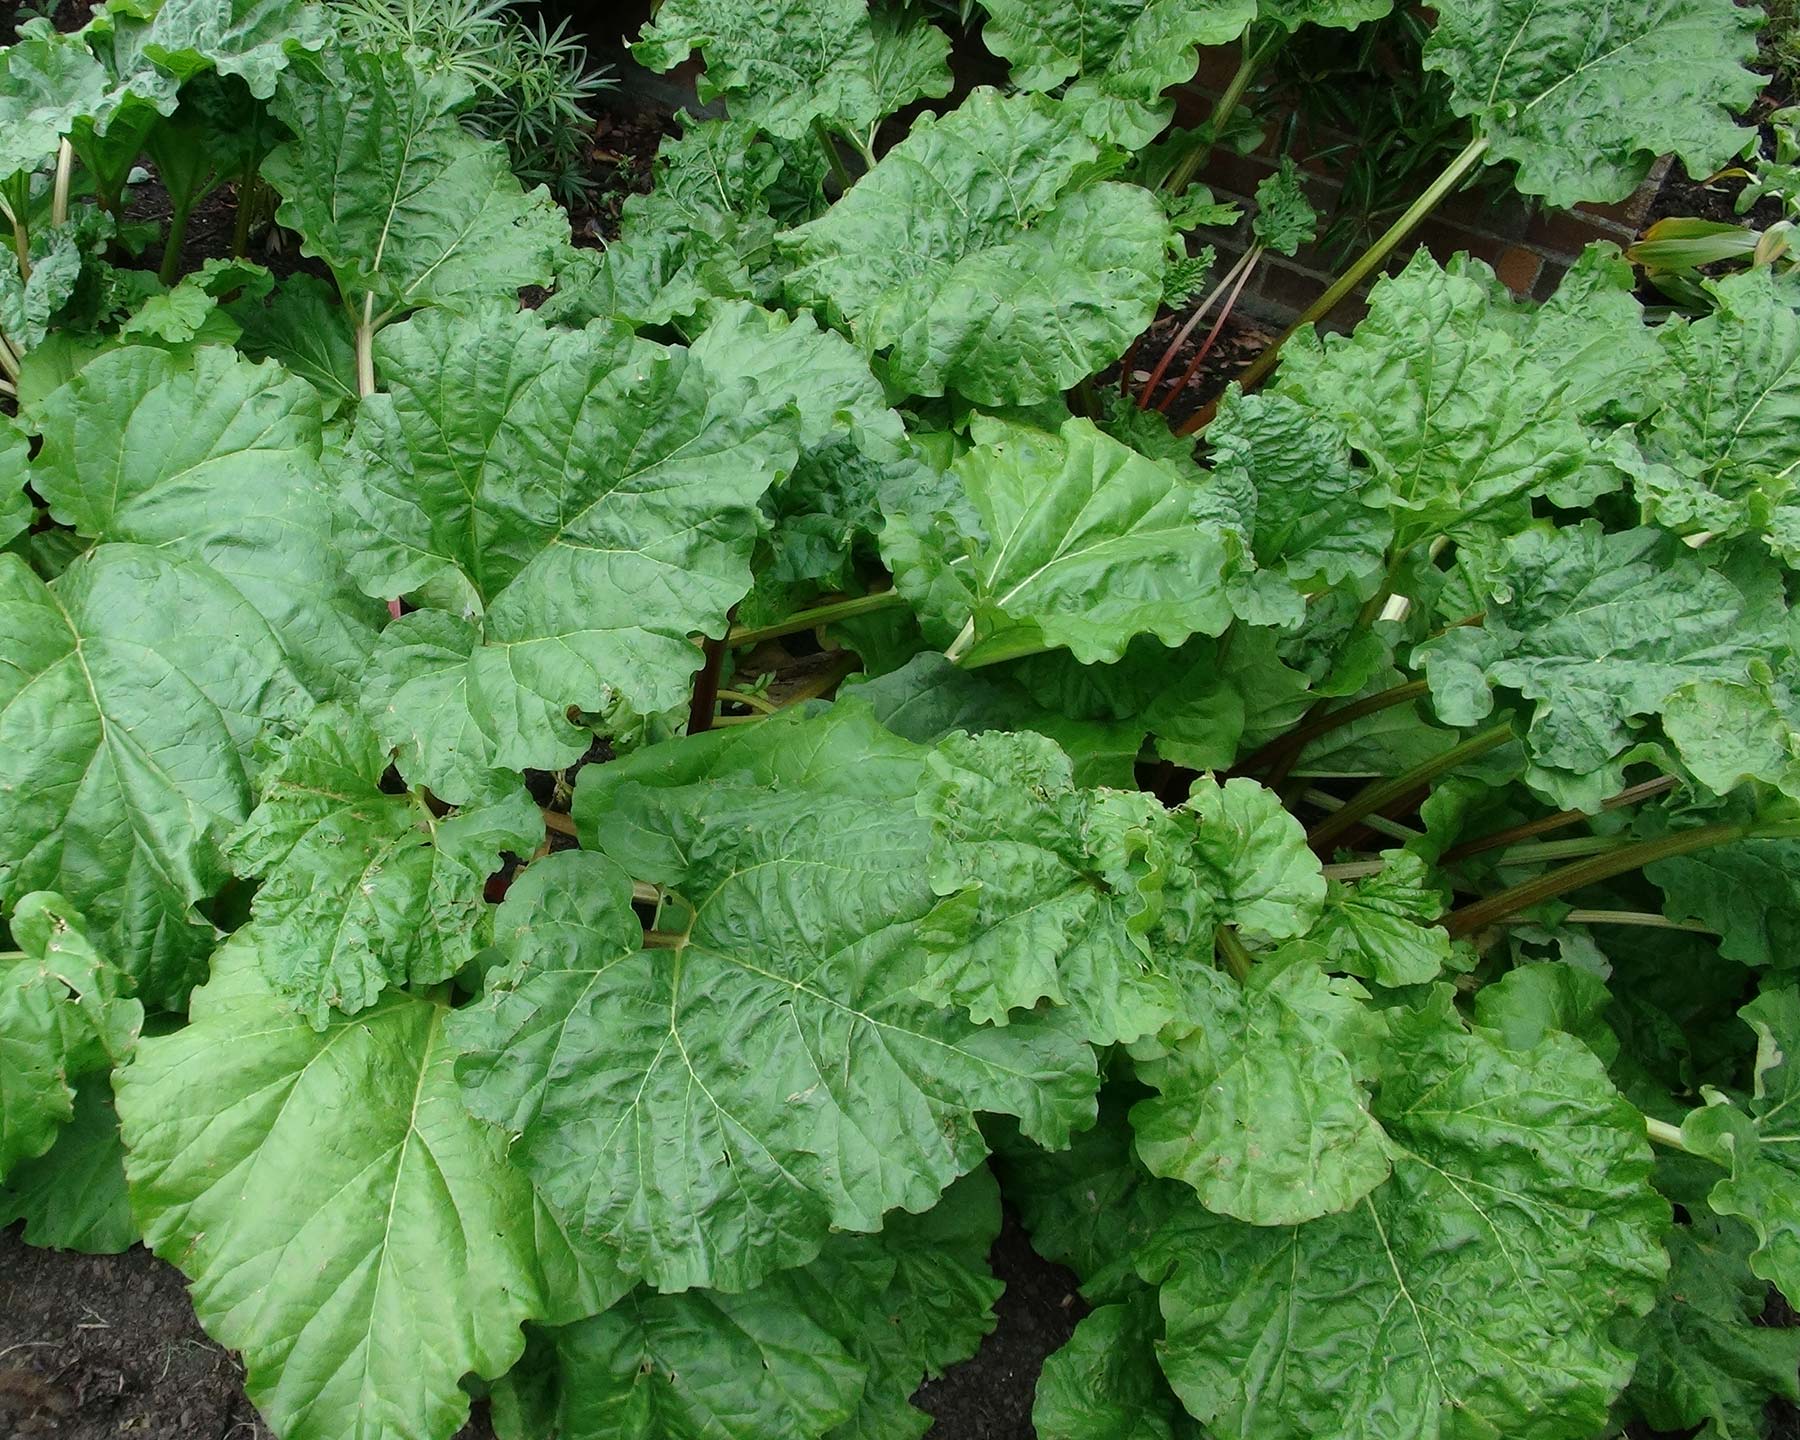 Rhubarb - it has long stalks and large leaves so allow lots of room